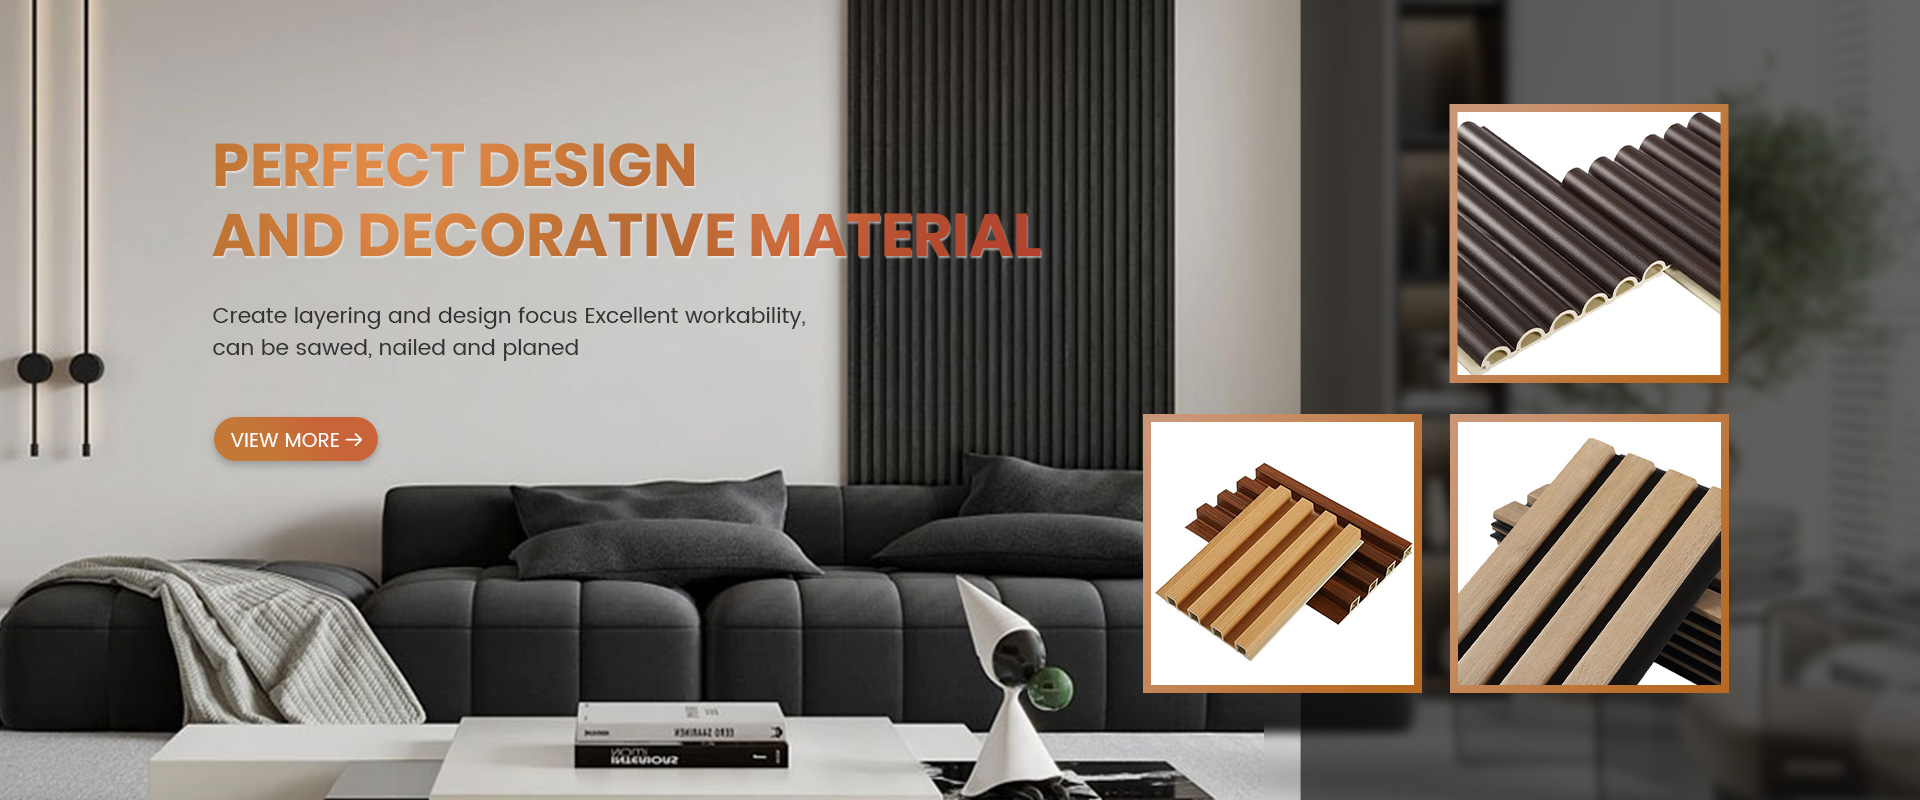 Perfect Design and Decorative Material